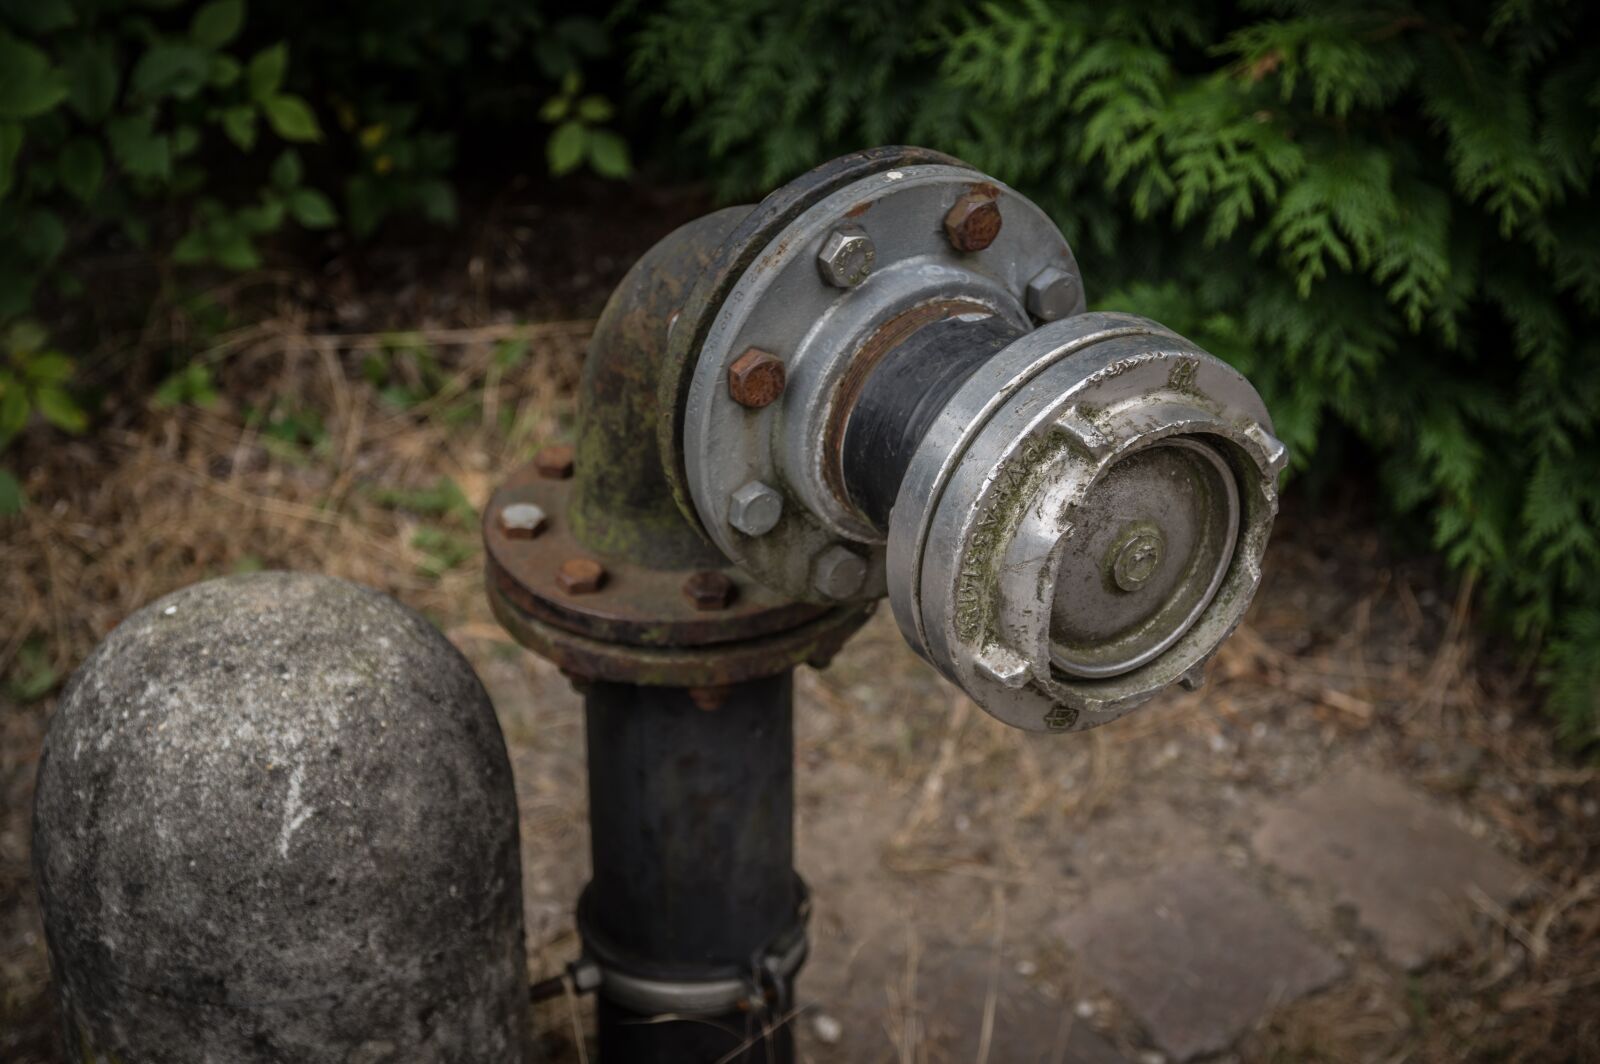 Pentax K-3 sample photo. Hydrant, water supply, fire photography